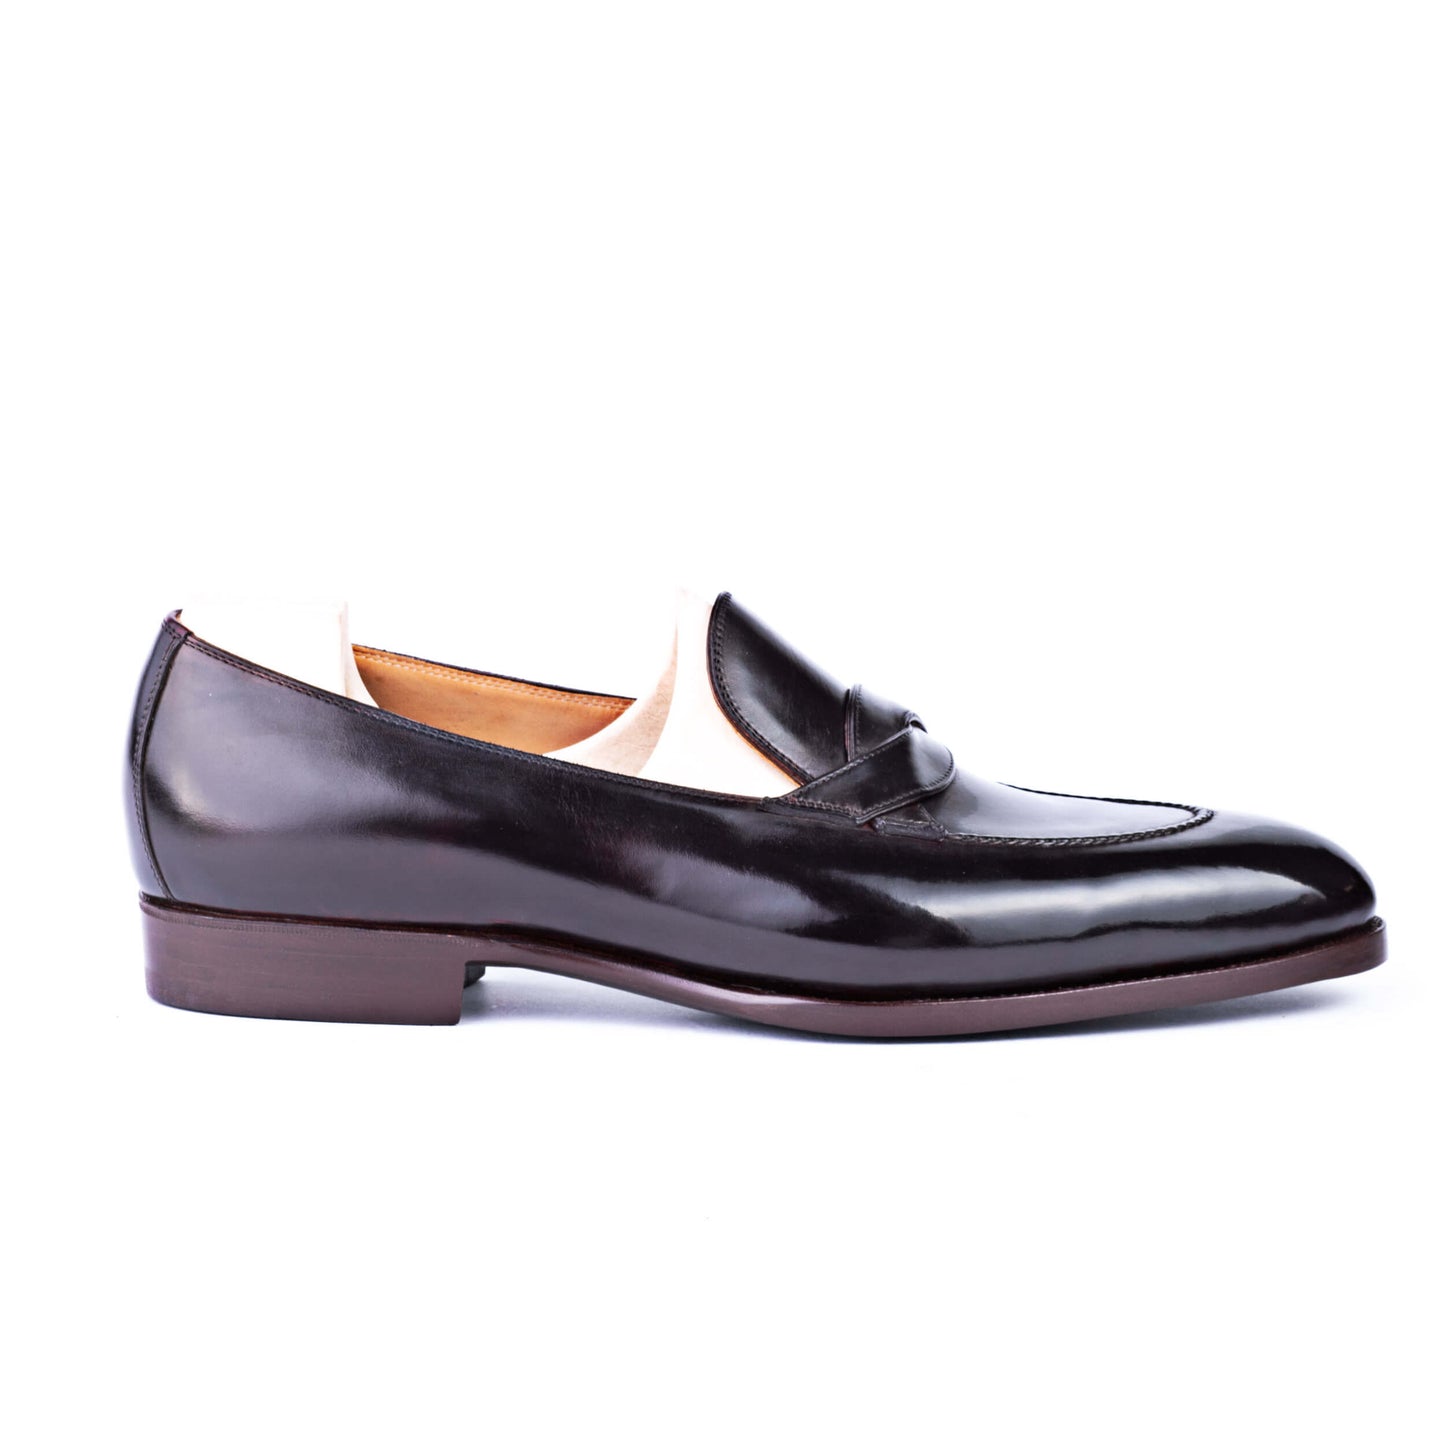 The Entwined Loafer in Dark Espresso Brown